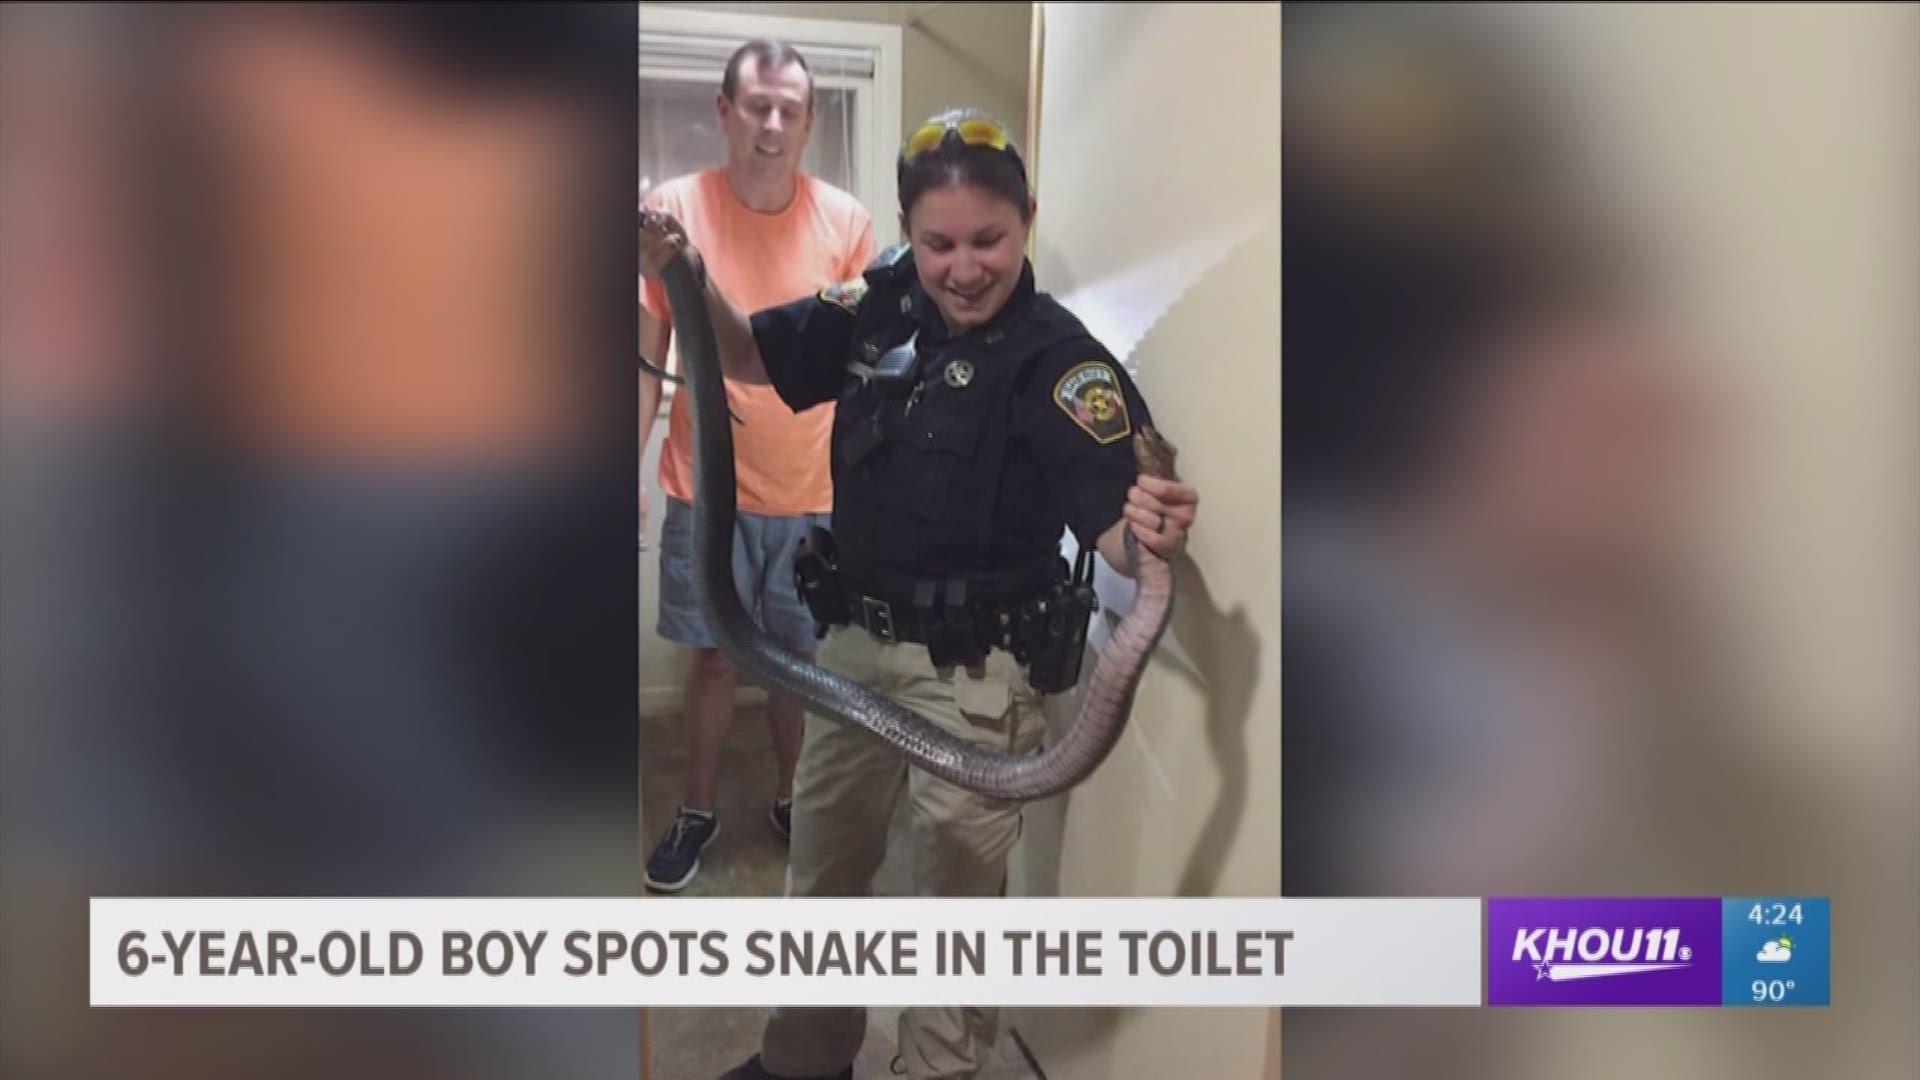 A 6-year-old spotted a 5-foot snake in a toilet while his dad was cleaning the bathroom.